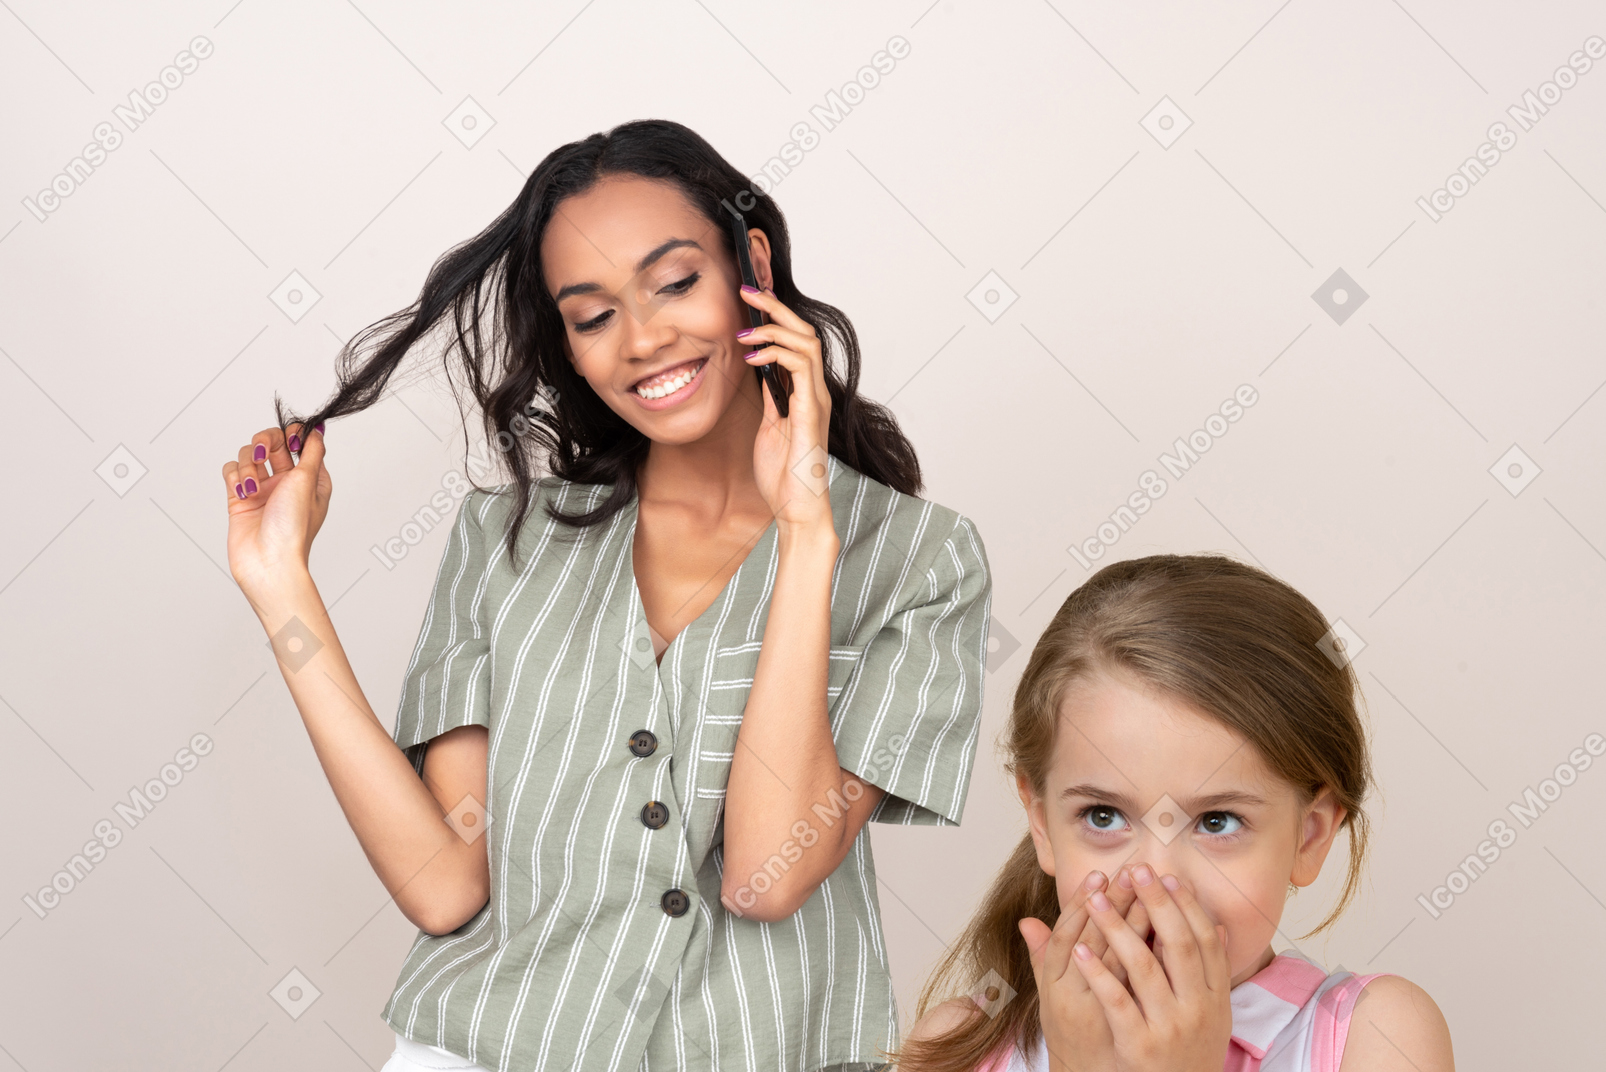 Attractive woman talking on the phone and little girl embarrassed with what she hears